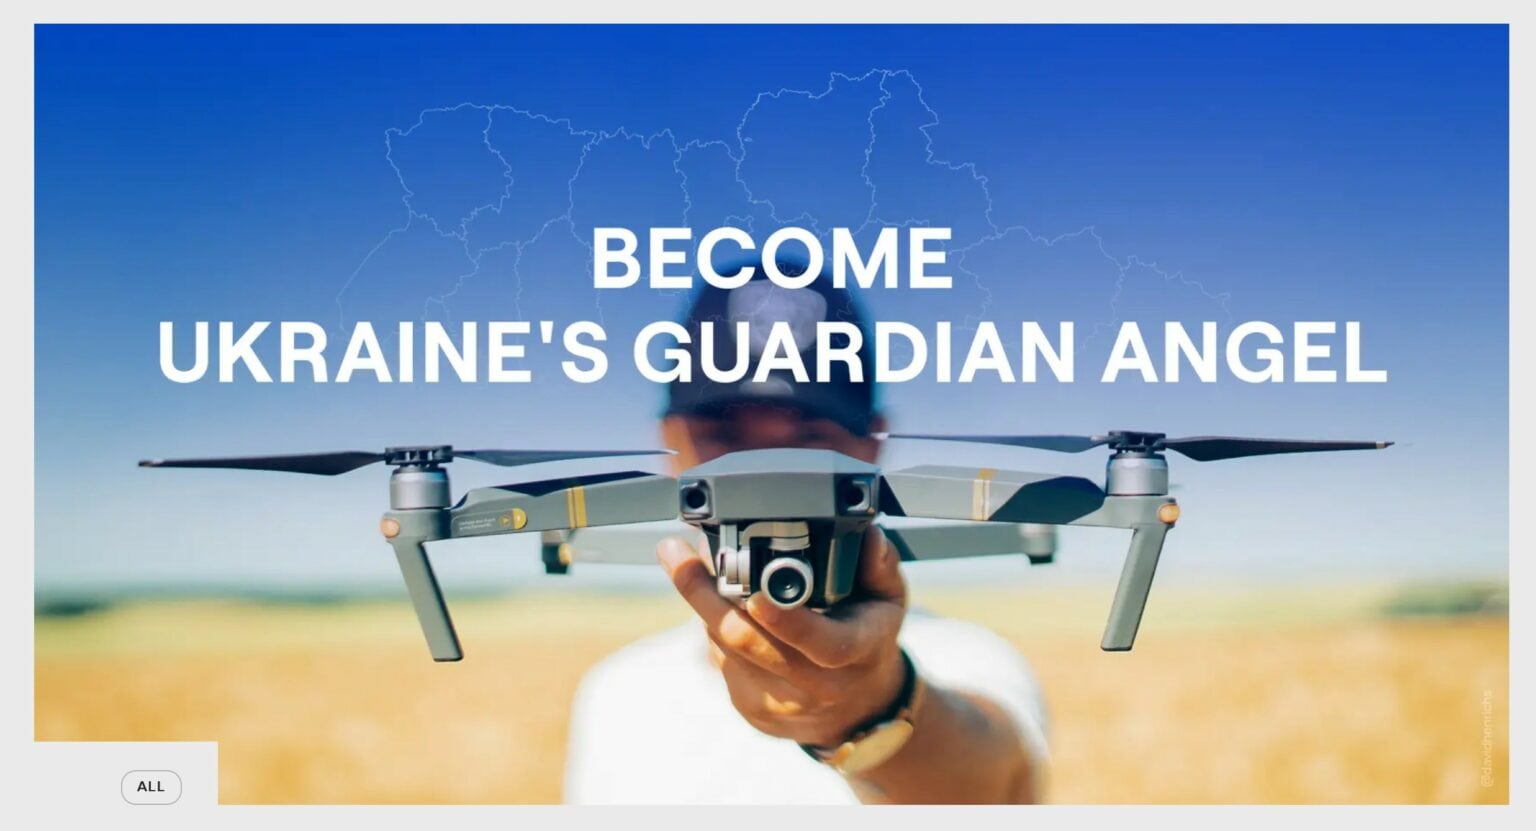 Want to help protect Ukrainian civilians during the Russian invasion? Donate a surveillance drone.